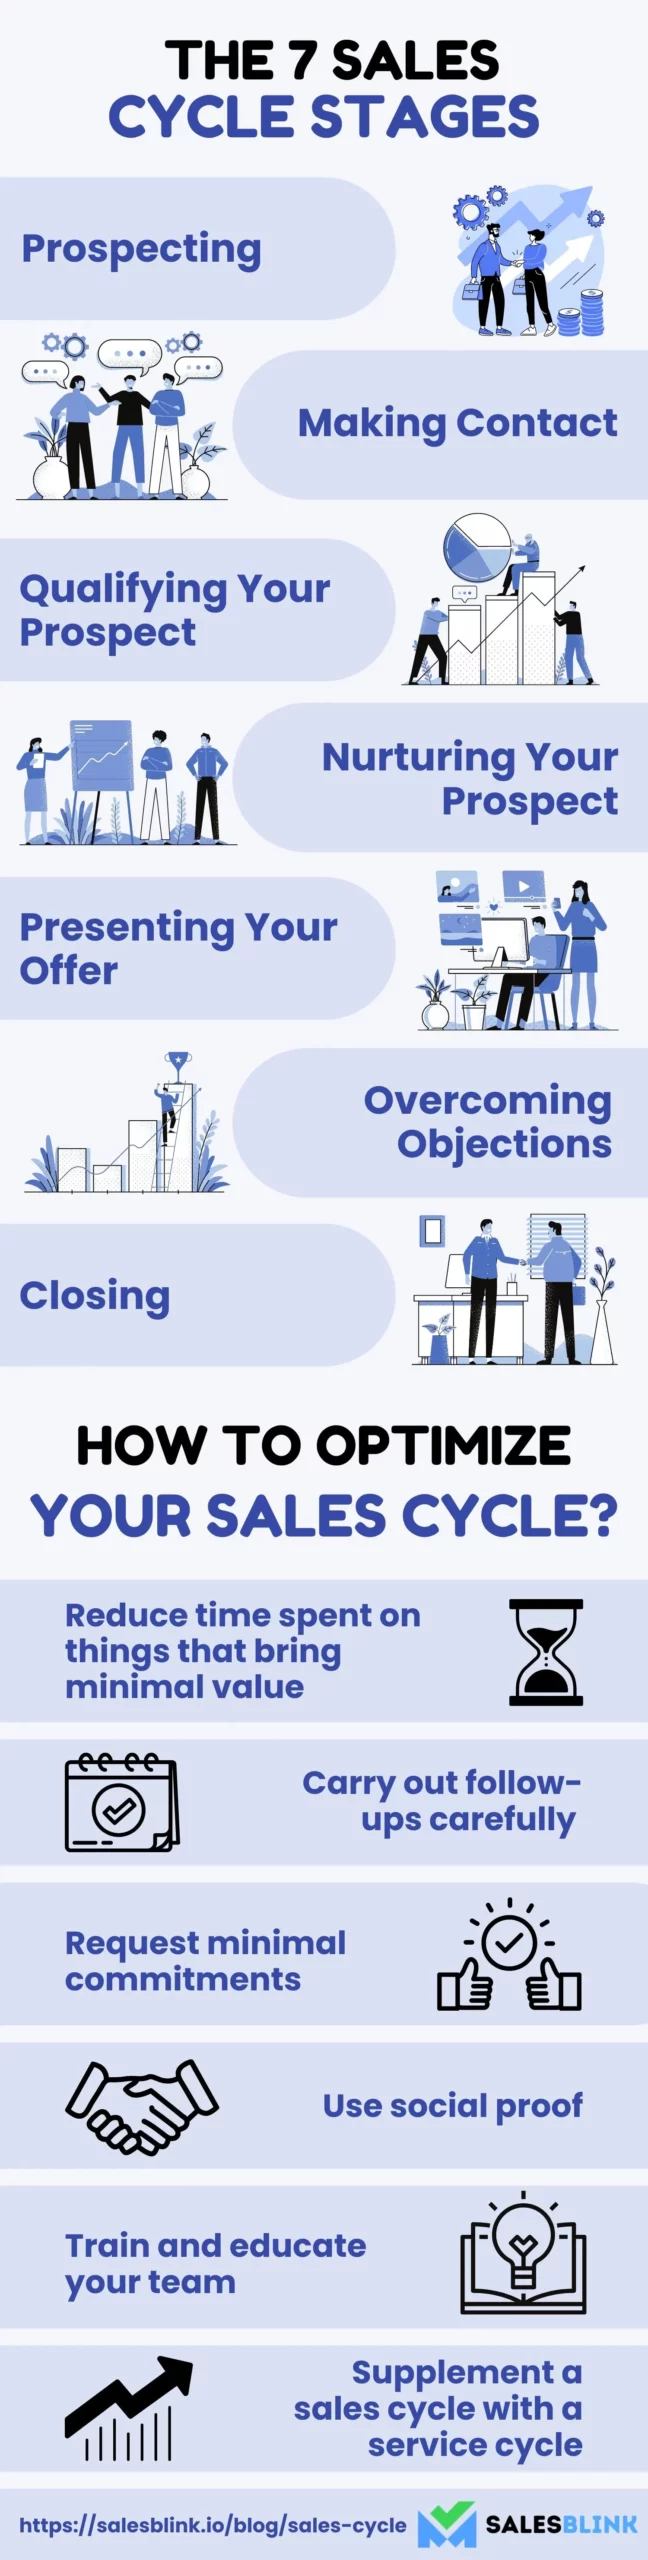 The 7 Sales Cycle Stages